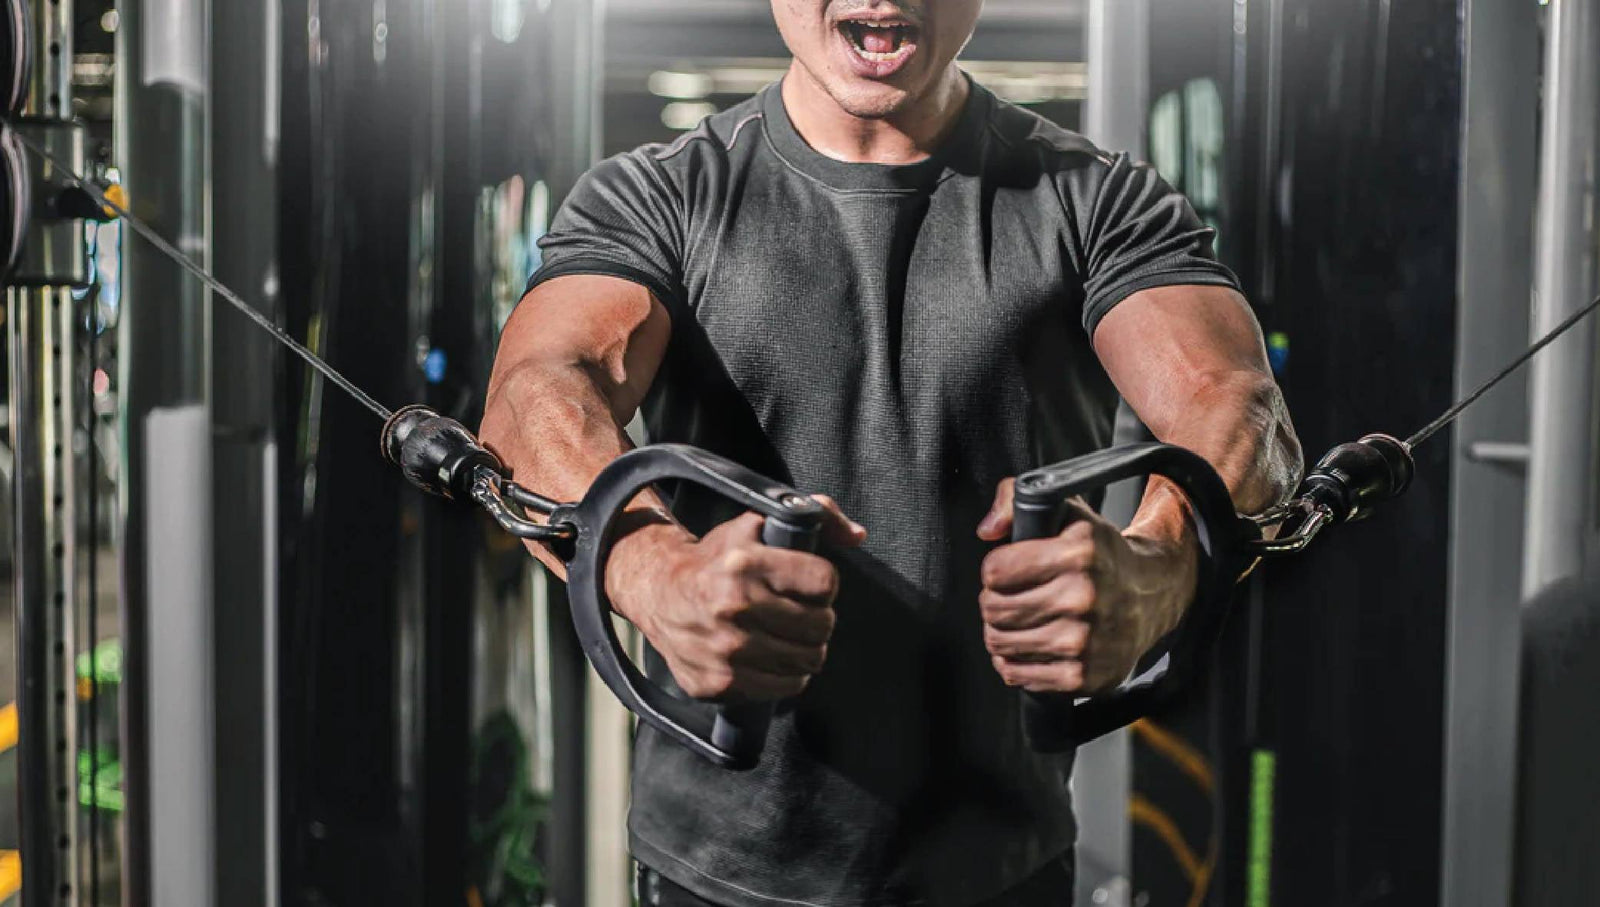 4 Tips To Improve Your Push Workout & Build A Bigger Chest – Built for  Athletes™